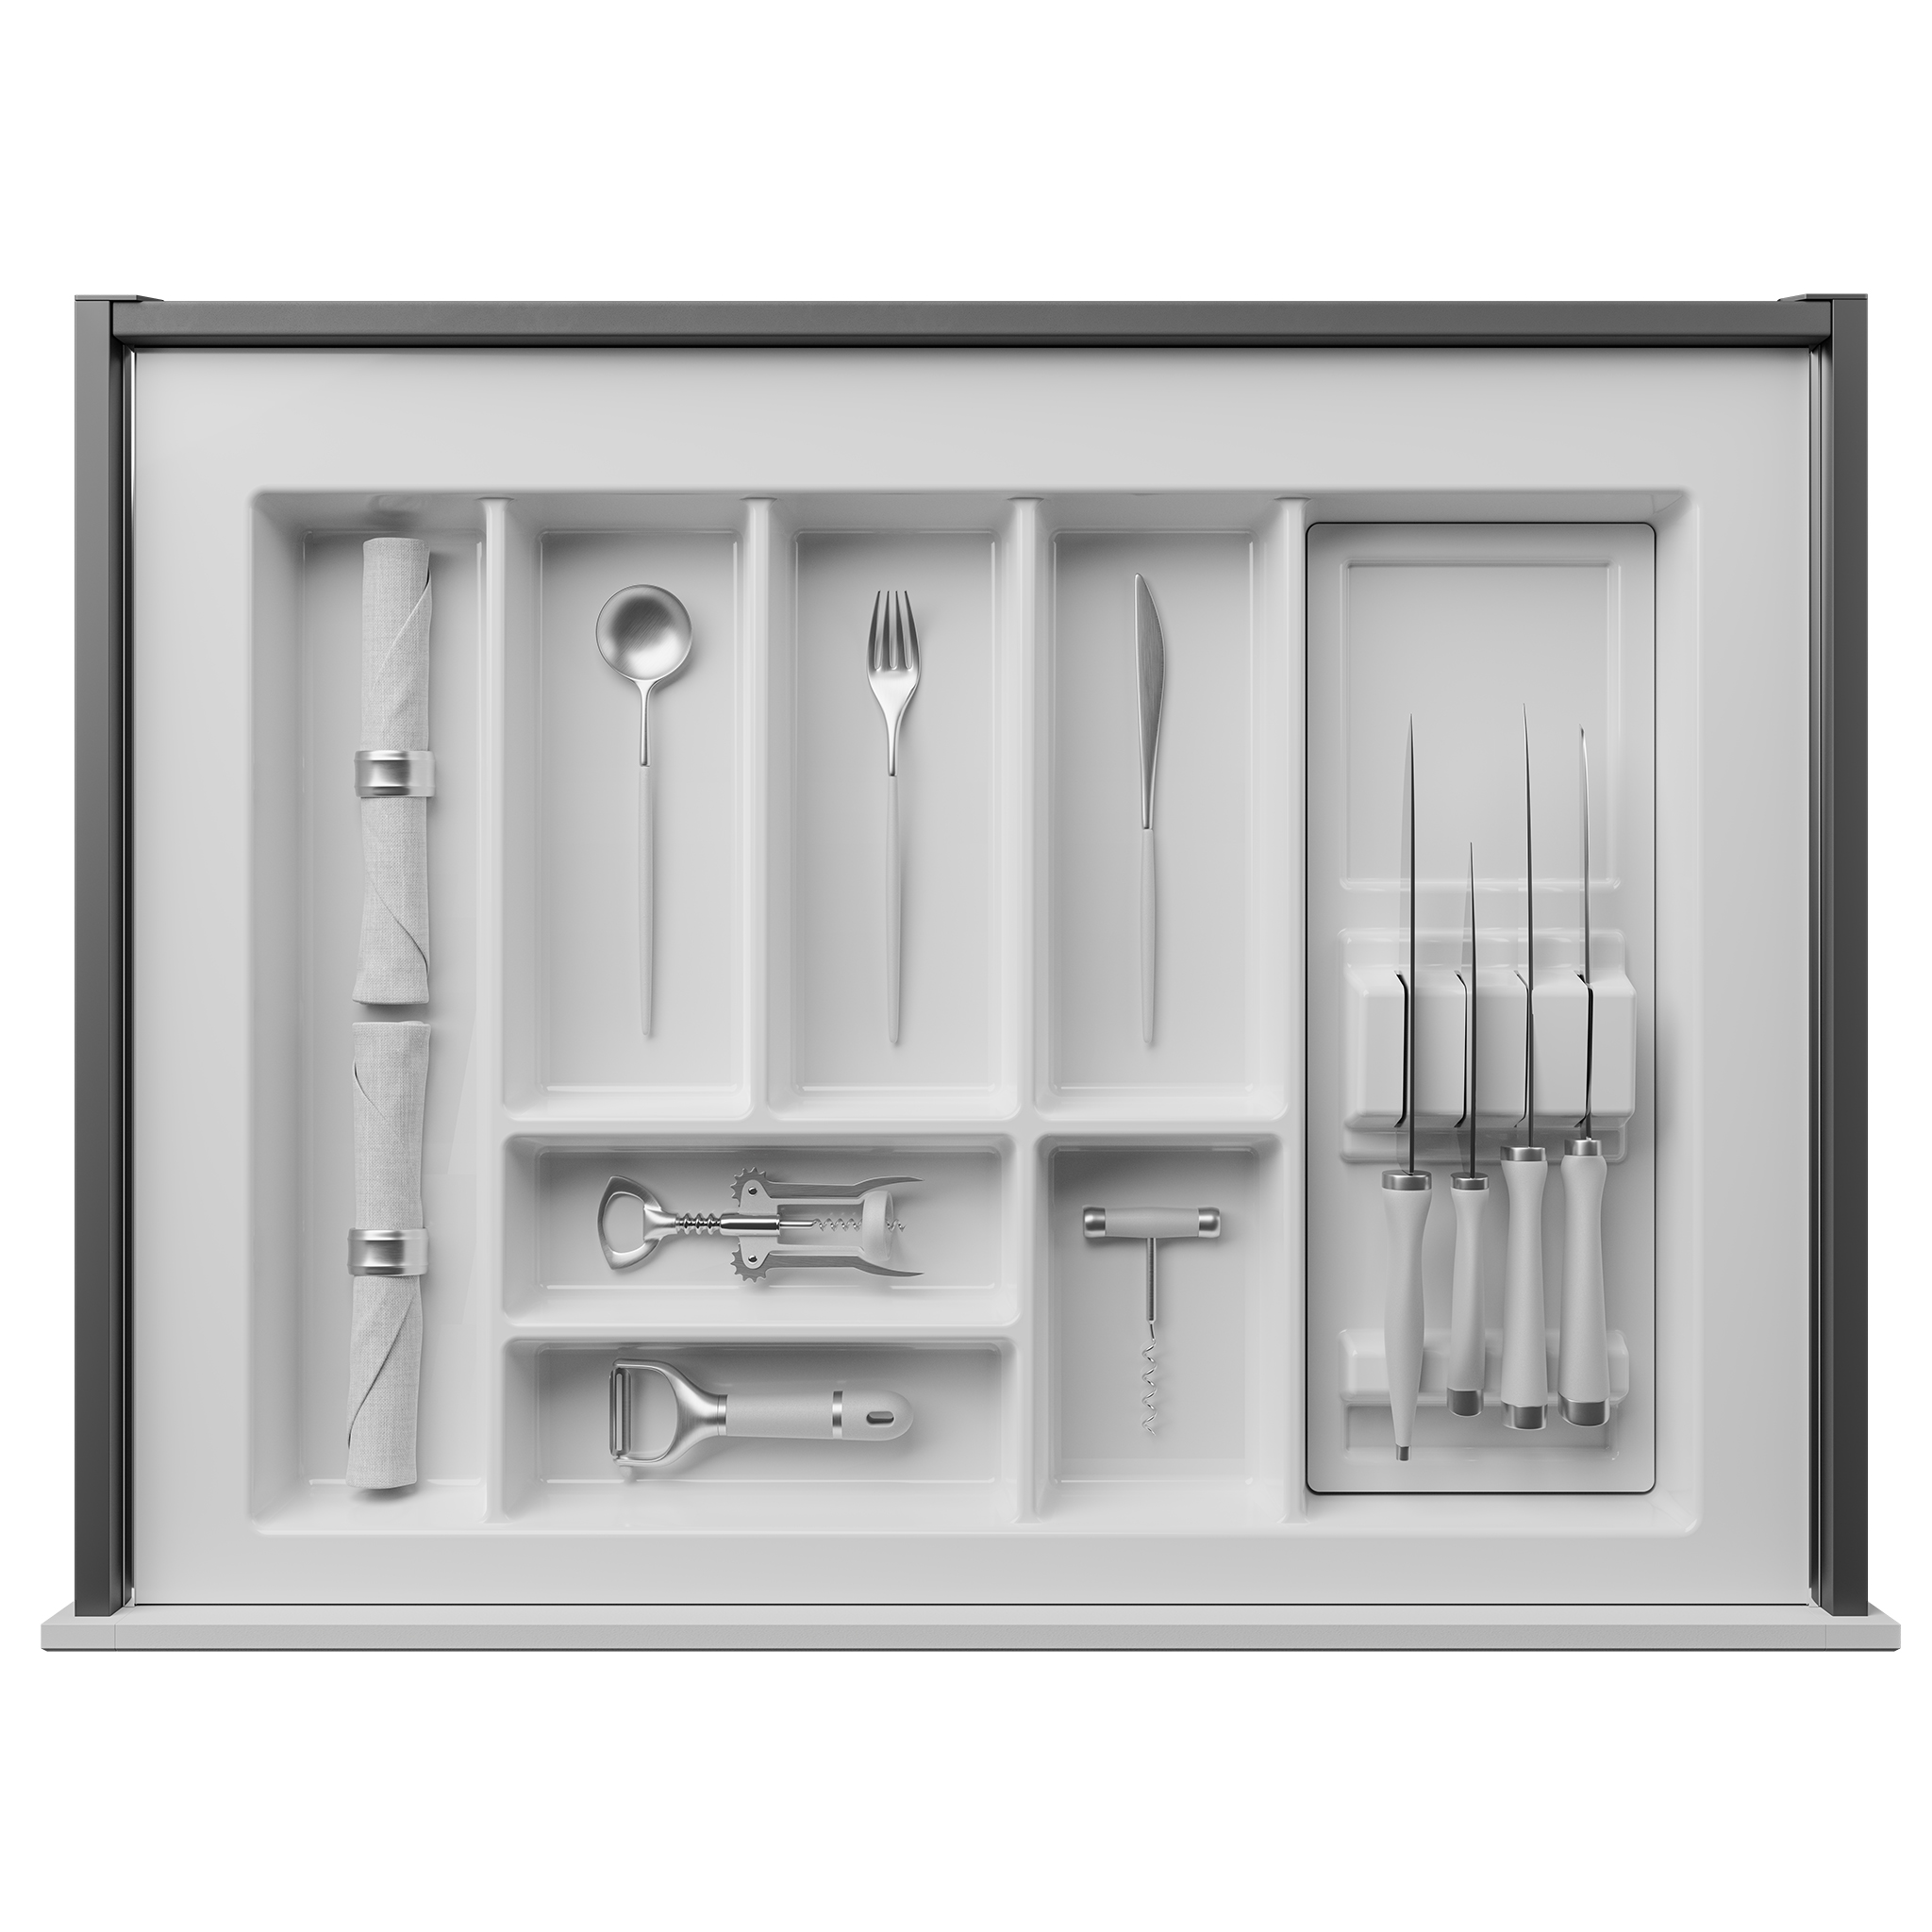 Area Kits for 30" (762mm) Wide Drawers